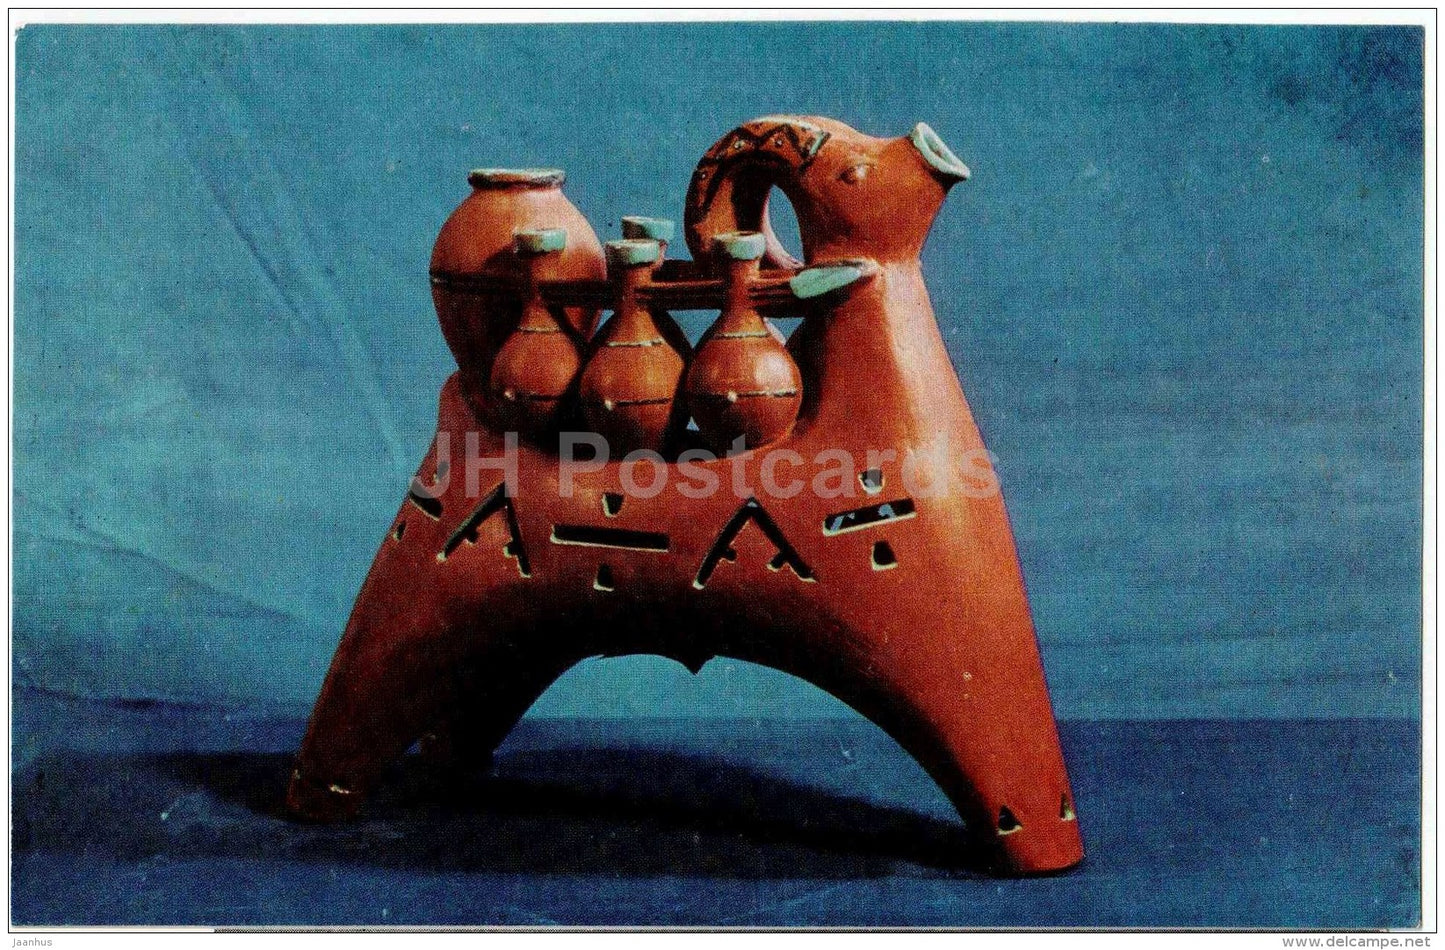 The Deer , Wine vessel by A. Kakabadze -  earthenware - Stamping and Ceramics of Georgia - 1968 - Georgia USSR - unused - JH Postcards